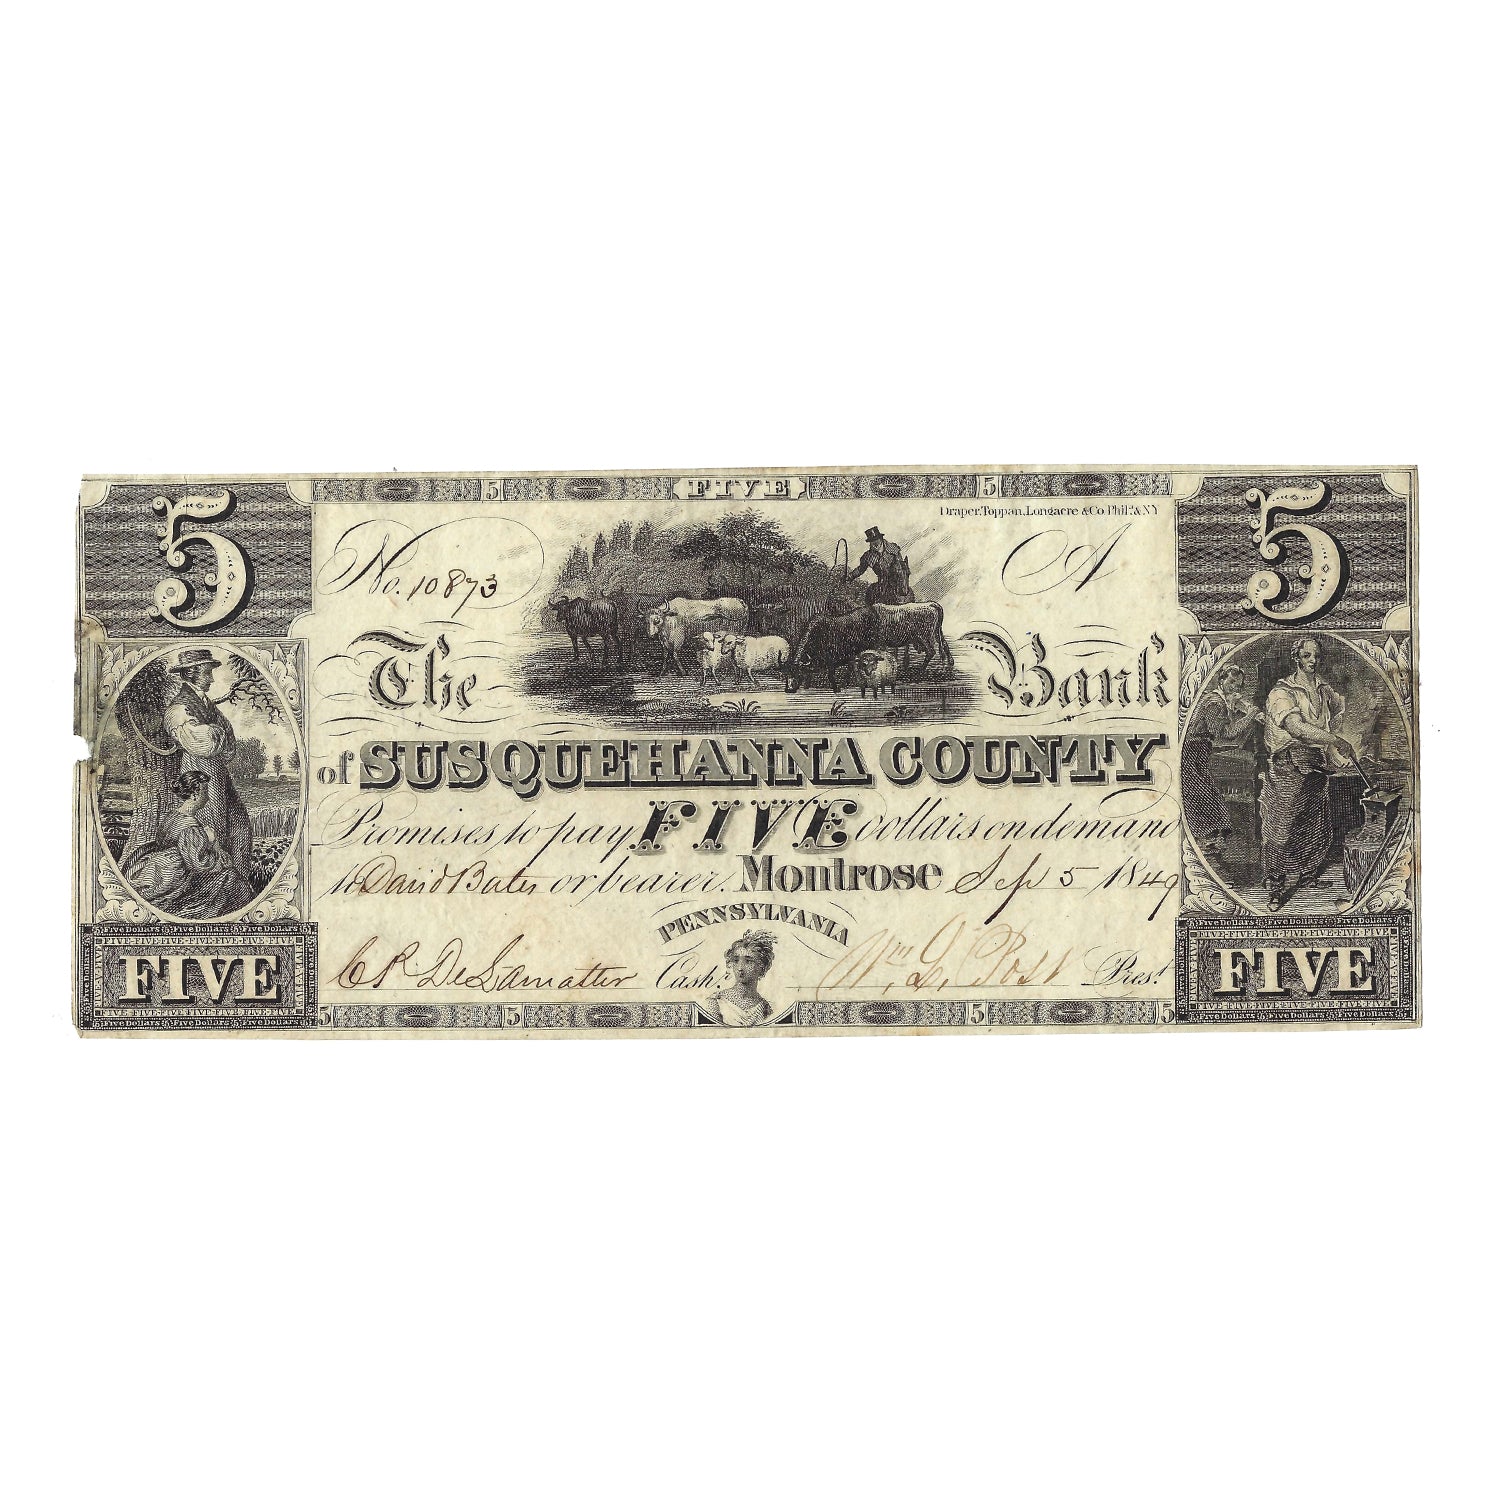 1849 $5 The Bank Of Susquehanna County Montrose, Pennsylvania Obsolete Bank Note